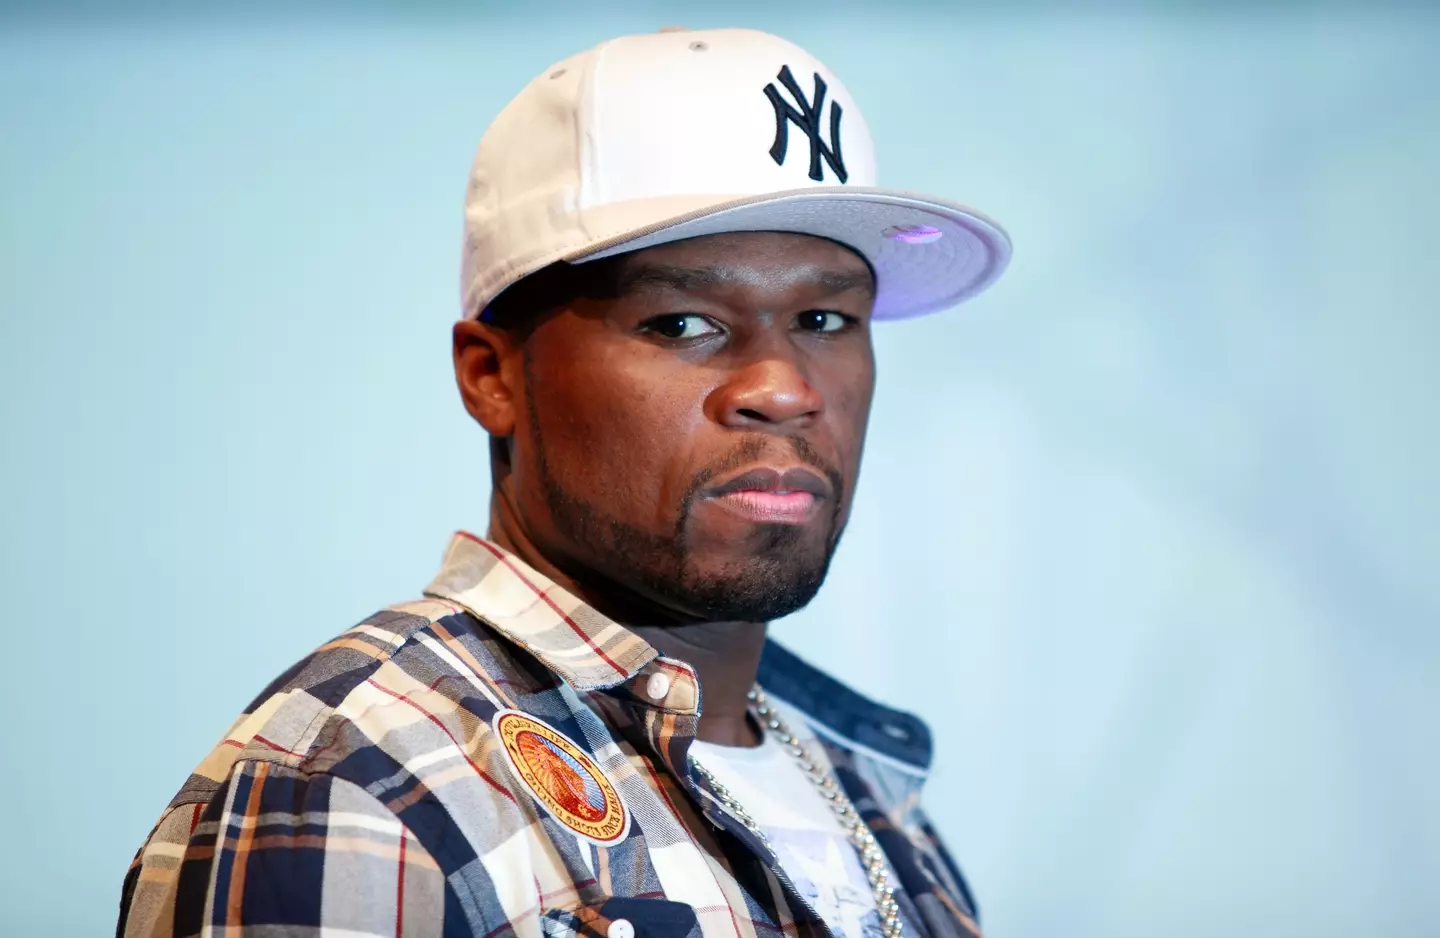 50 Cent alleges a Miami doctor used photos of him to wrongly imply he’d had penile enhancement surgery and is suing the surgeon.